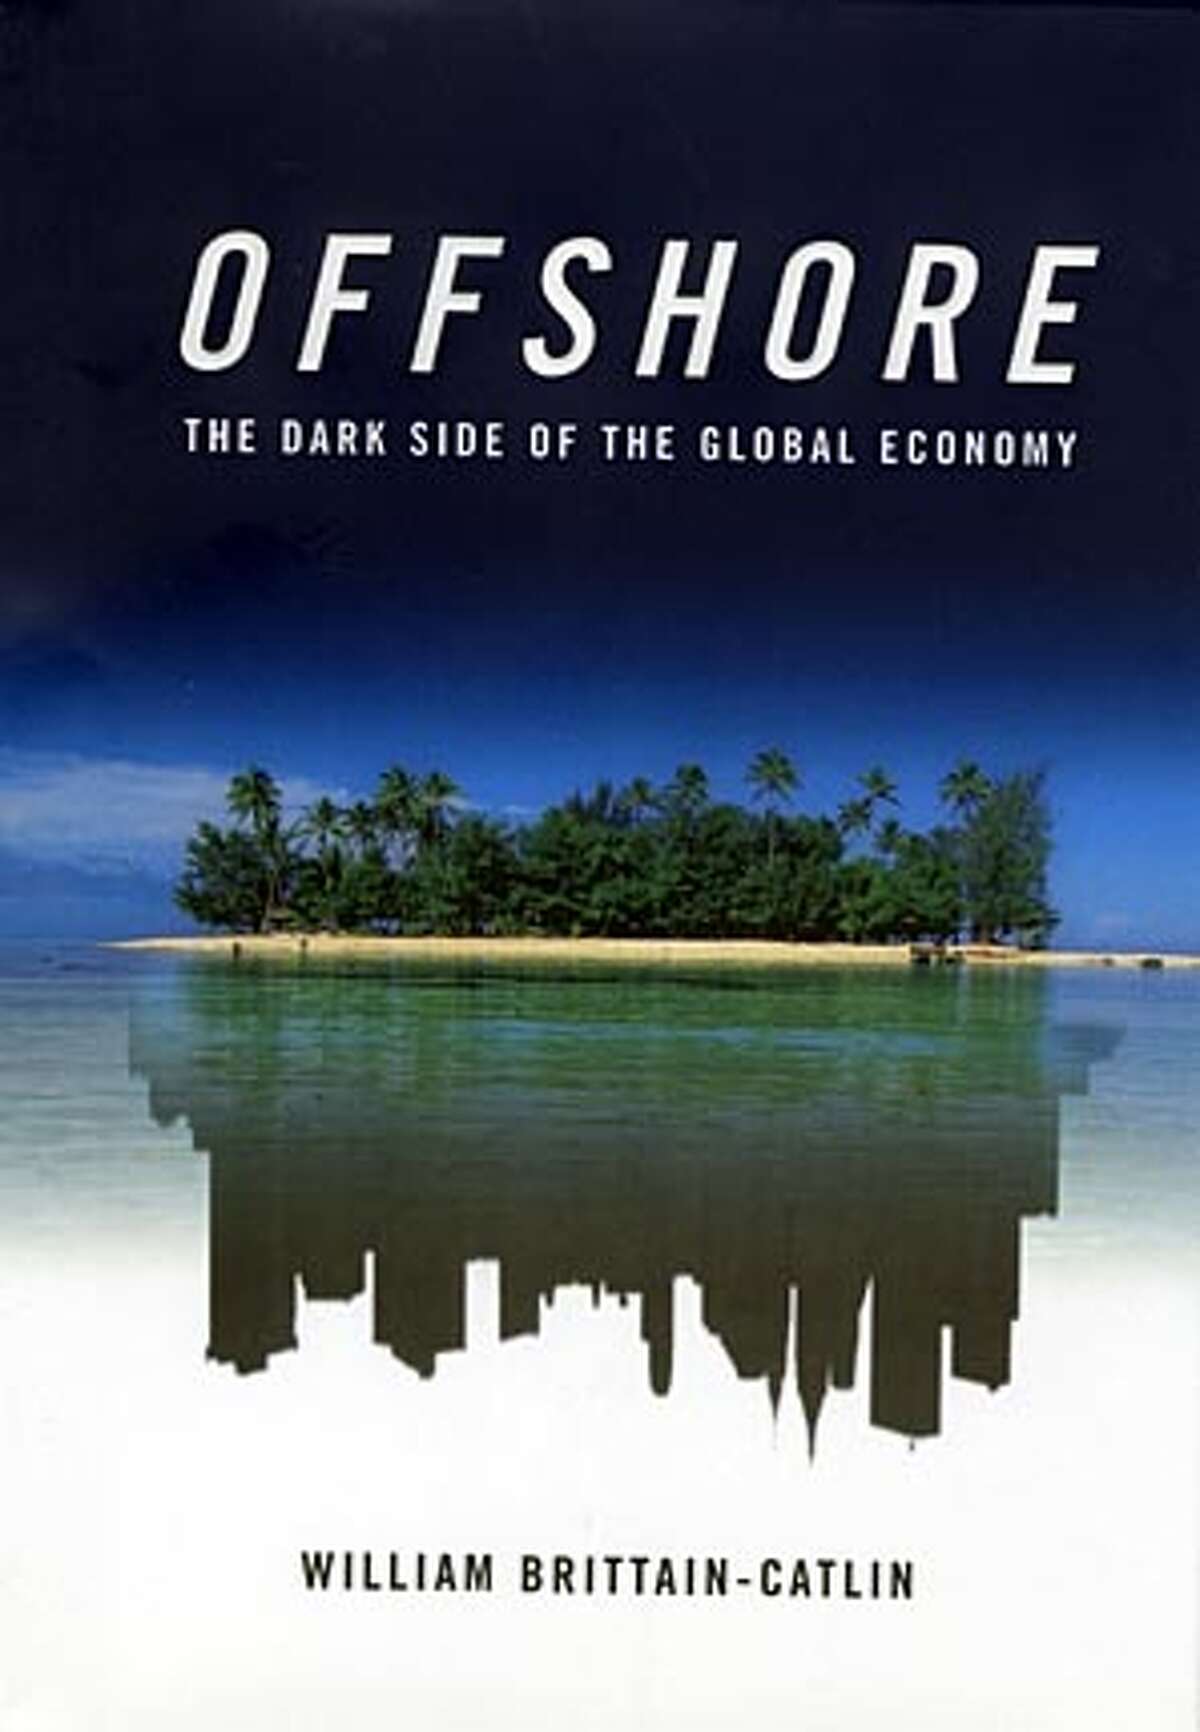 "Offshore: The Dark Side of the Global Economy" by William Brittain-Catlin (Farrar, Straus and Giroux; 288 pages; $25)